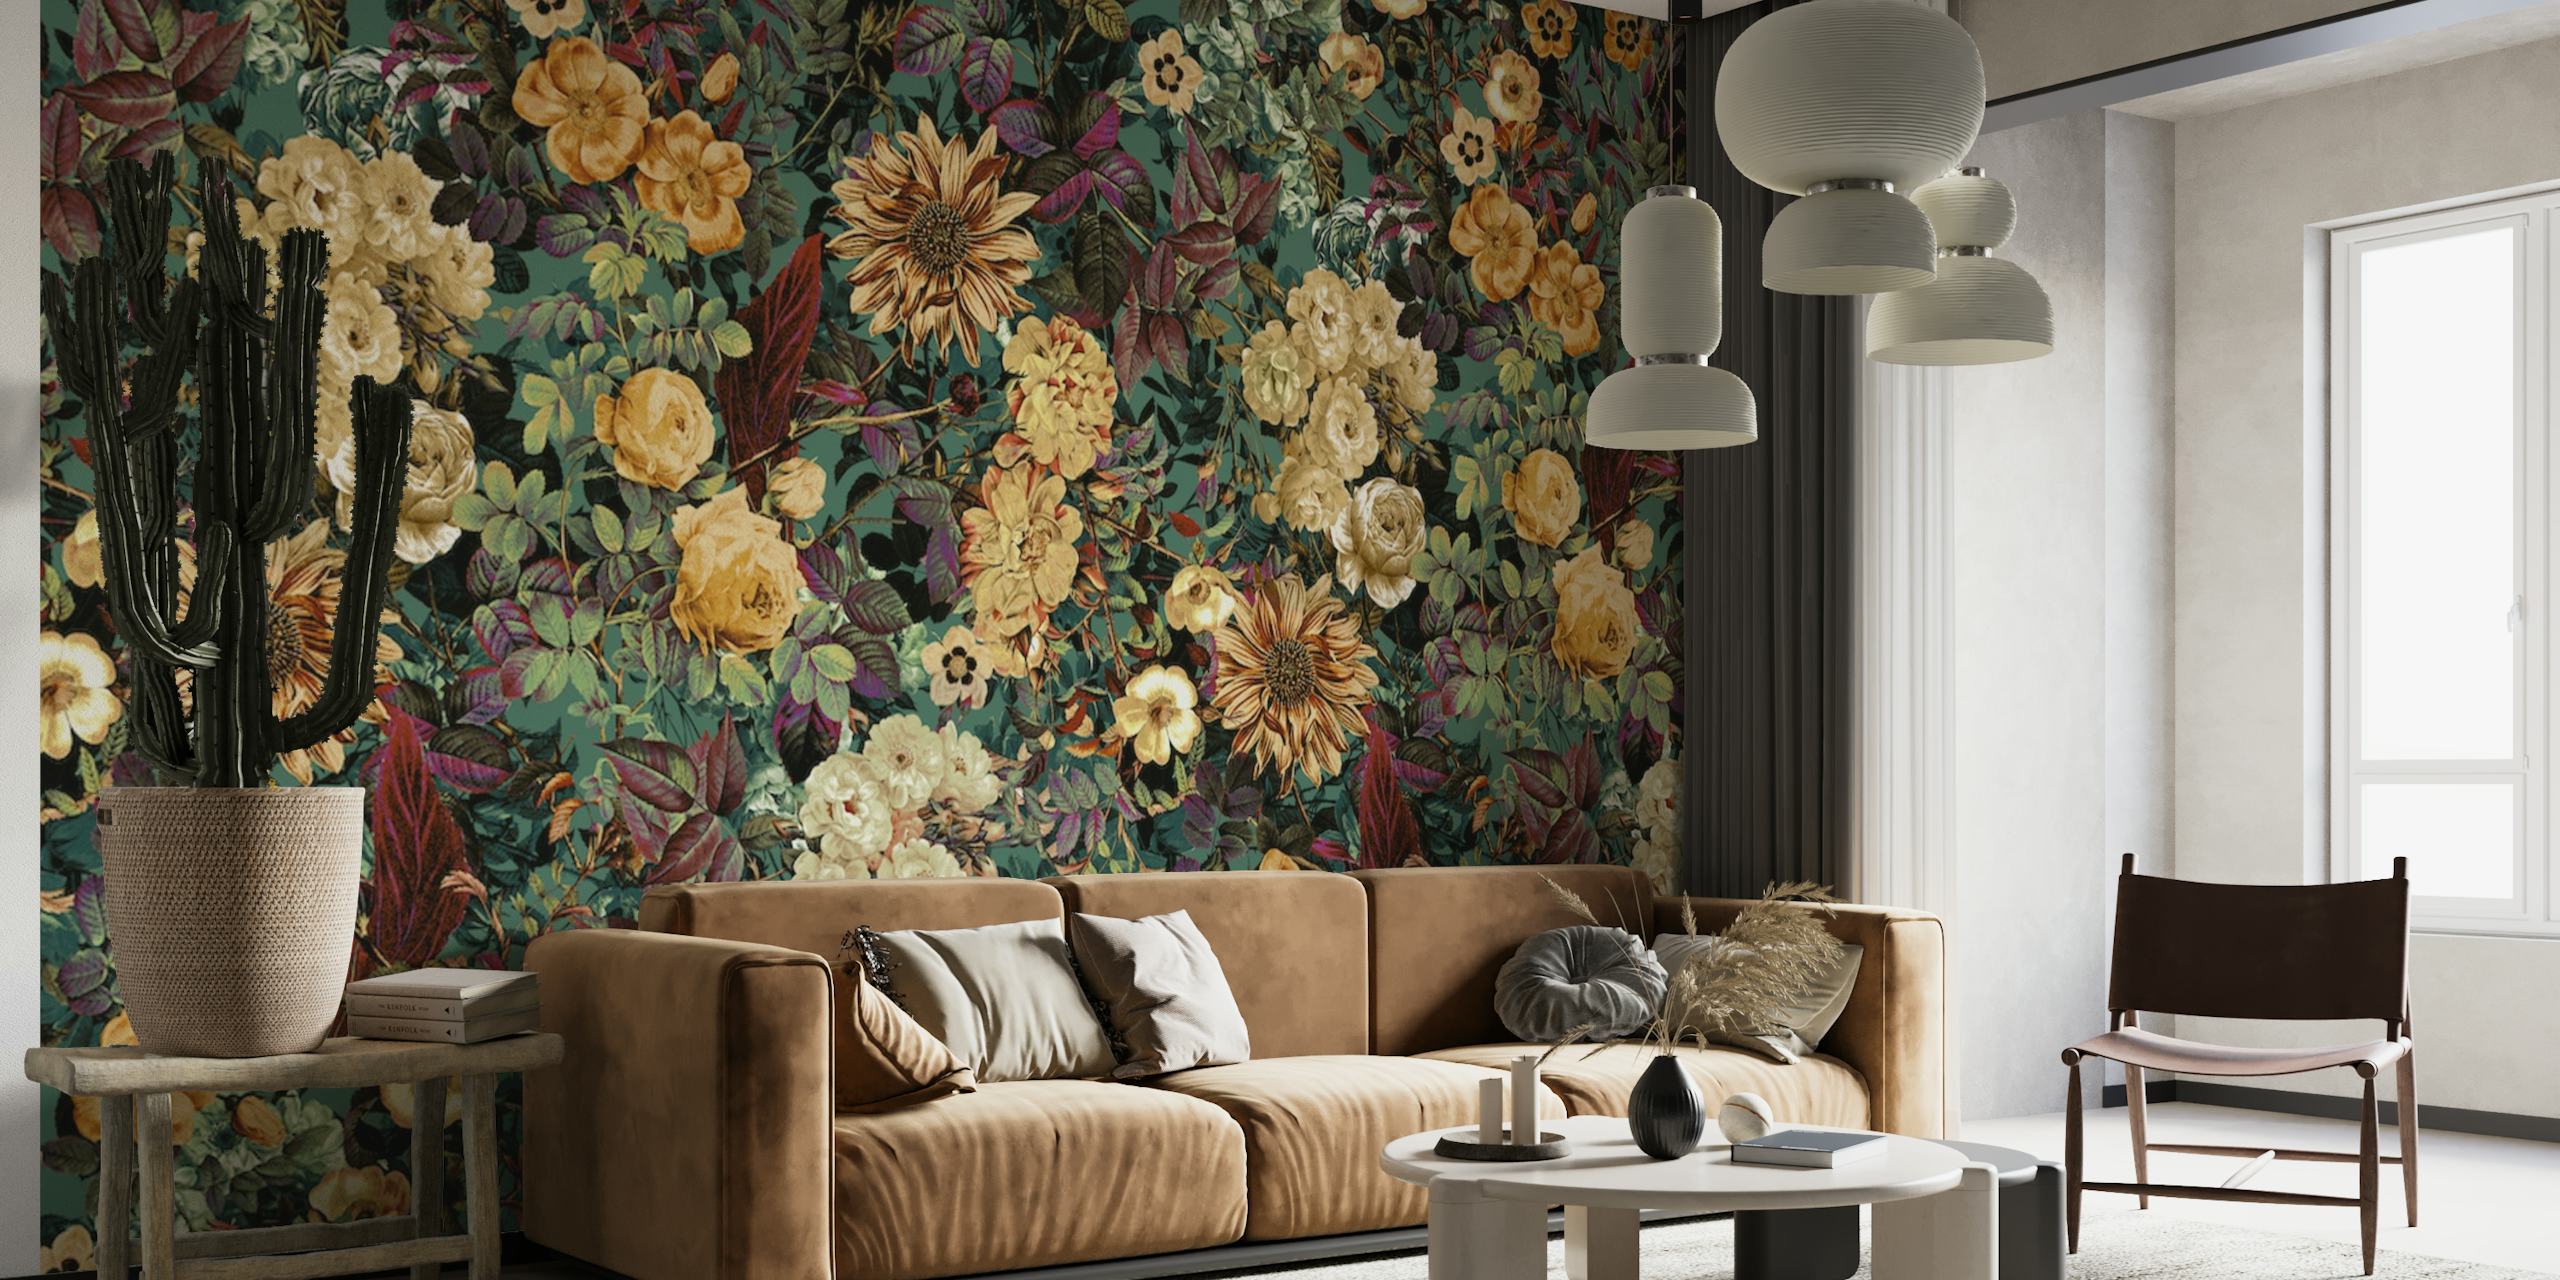 Floral wall mural 'Isolated Blooms' with a dark background and a mix of cream and gold flowers.